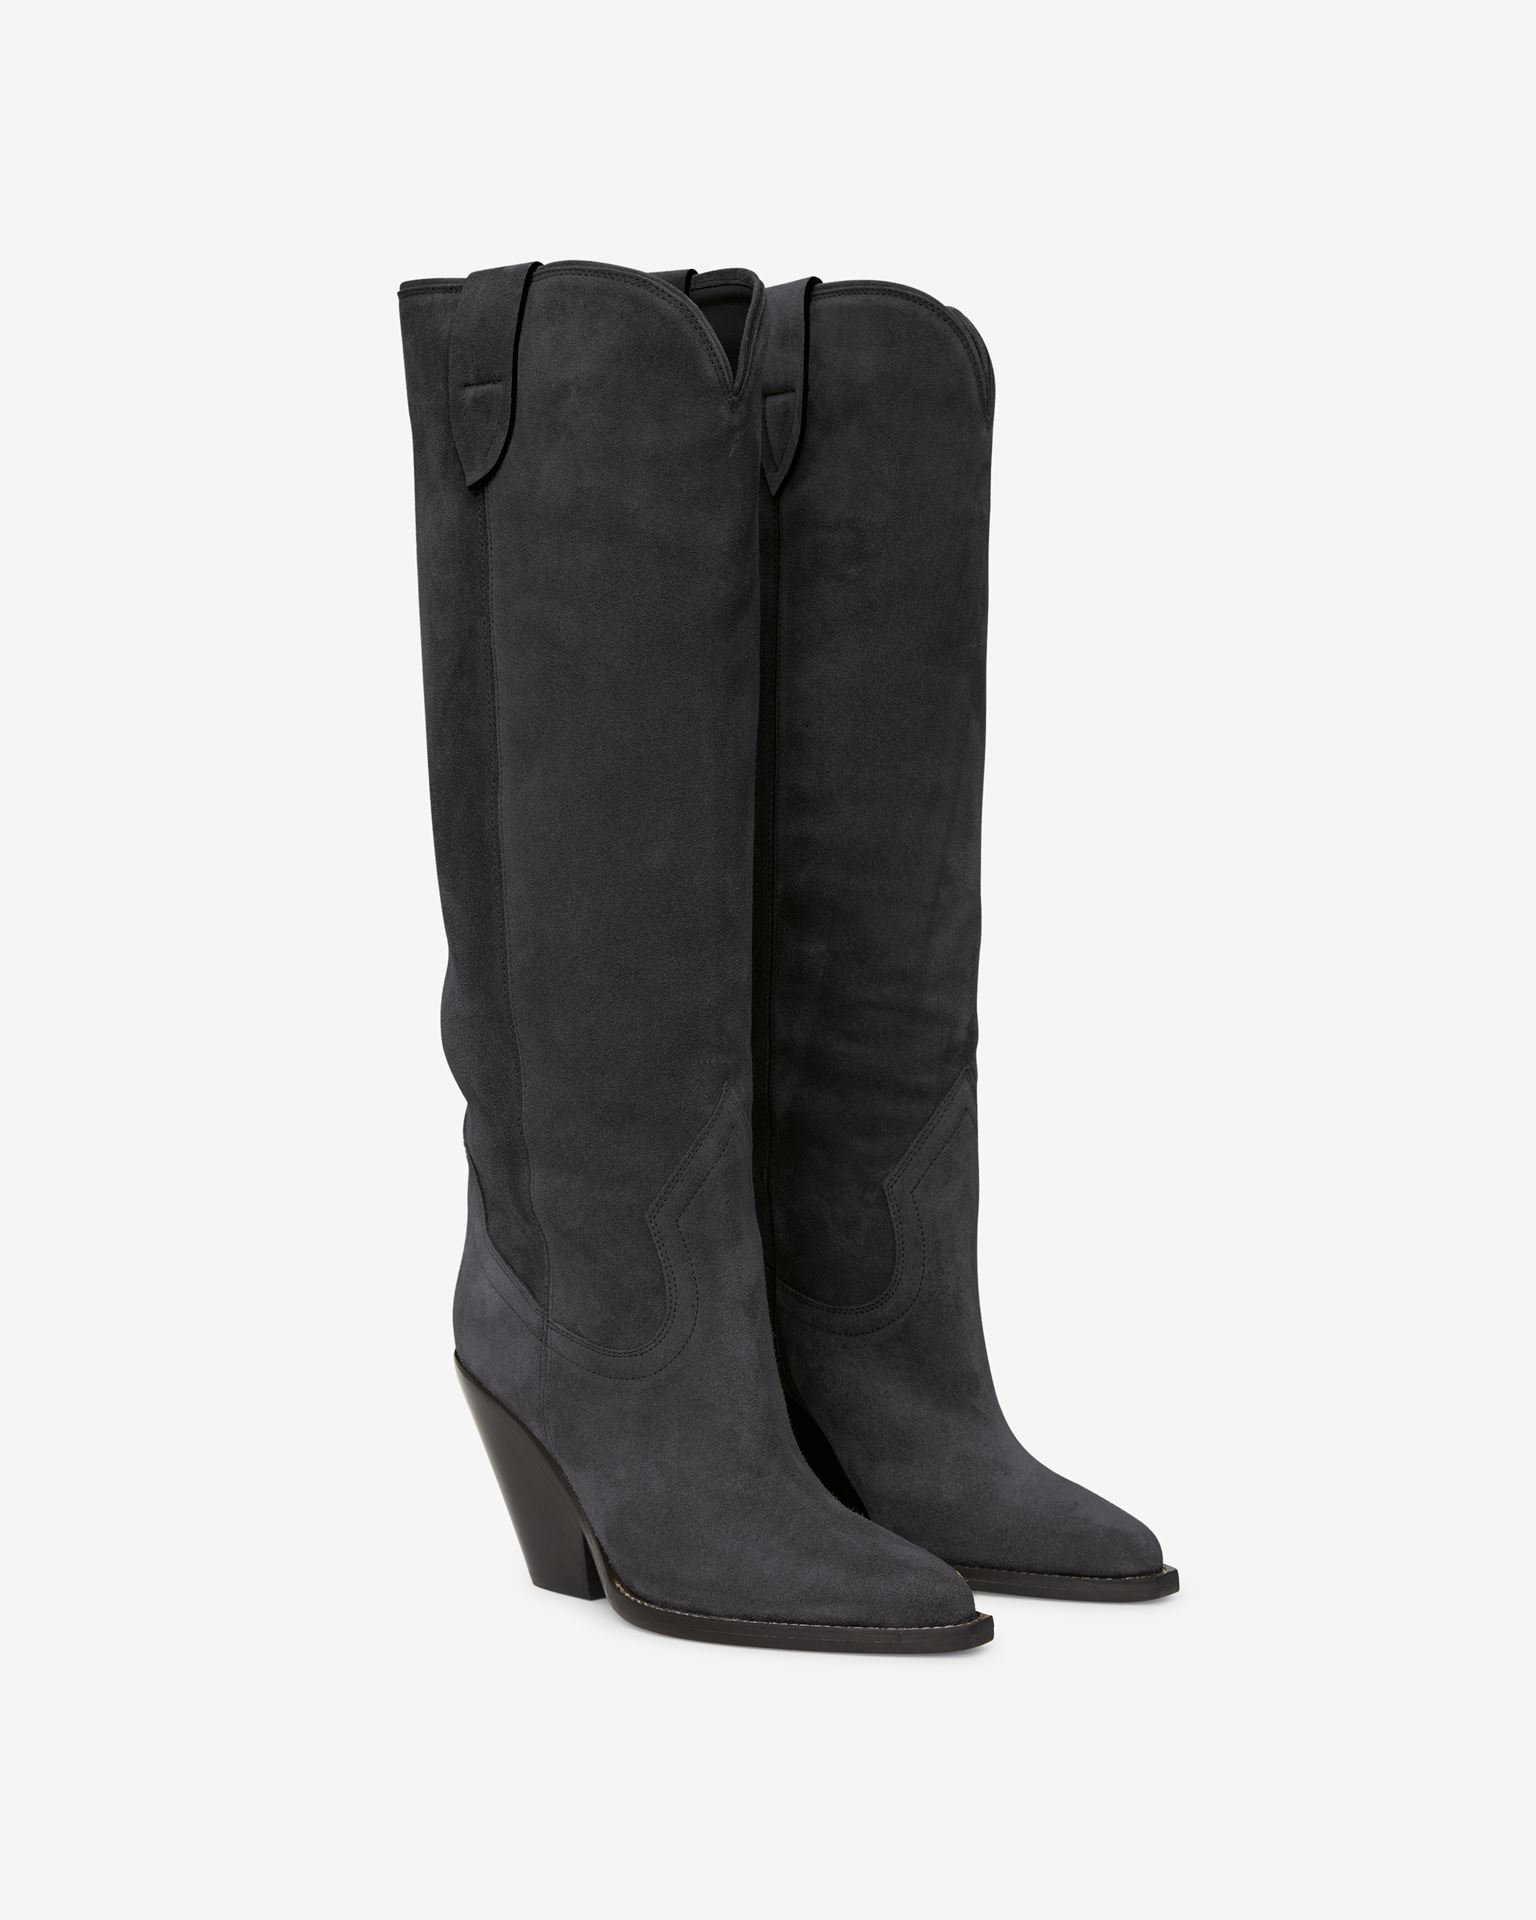 Isabel Marant, Lomero Suede Leather Boots - Women - Grey